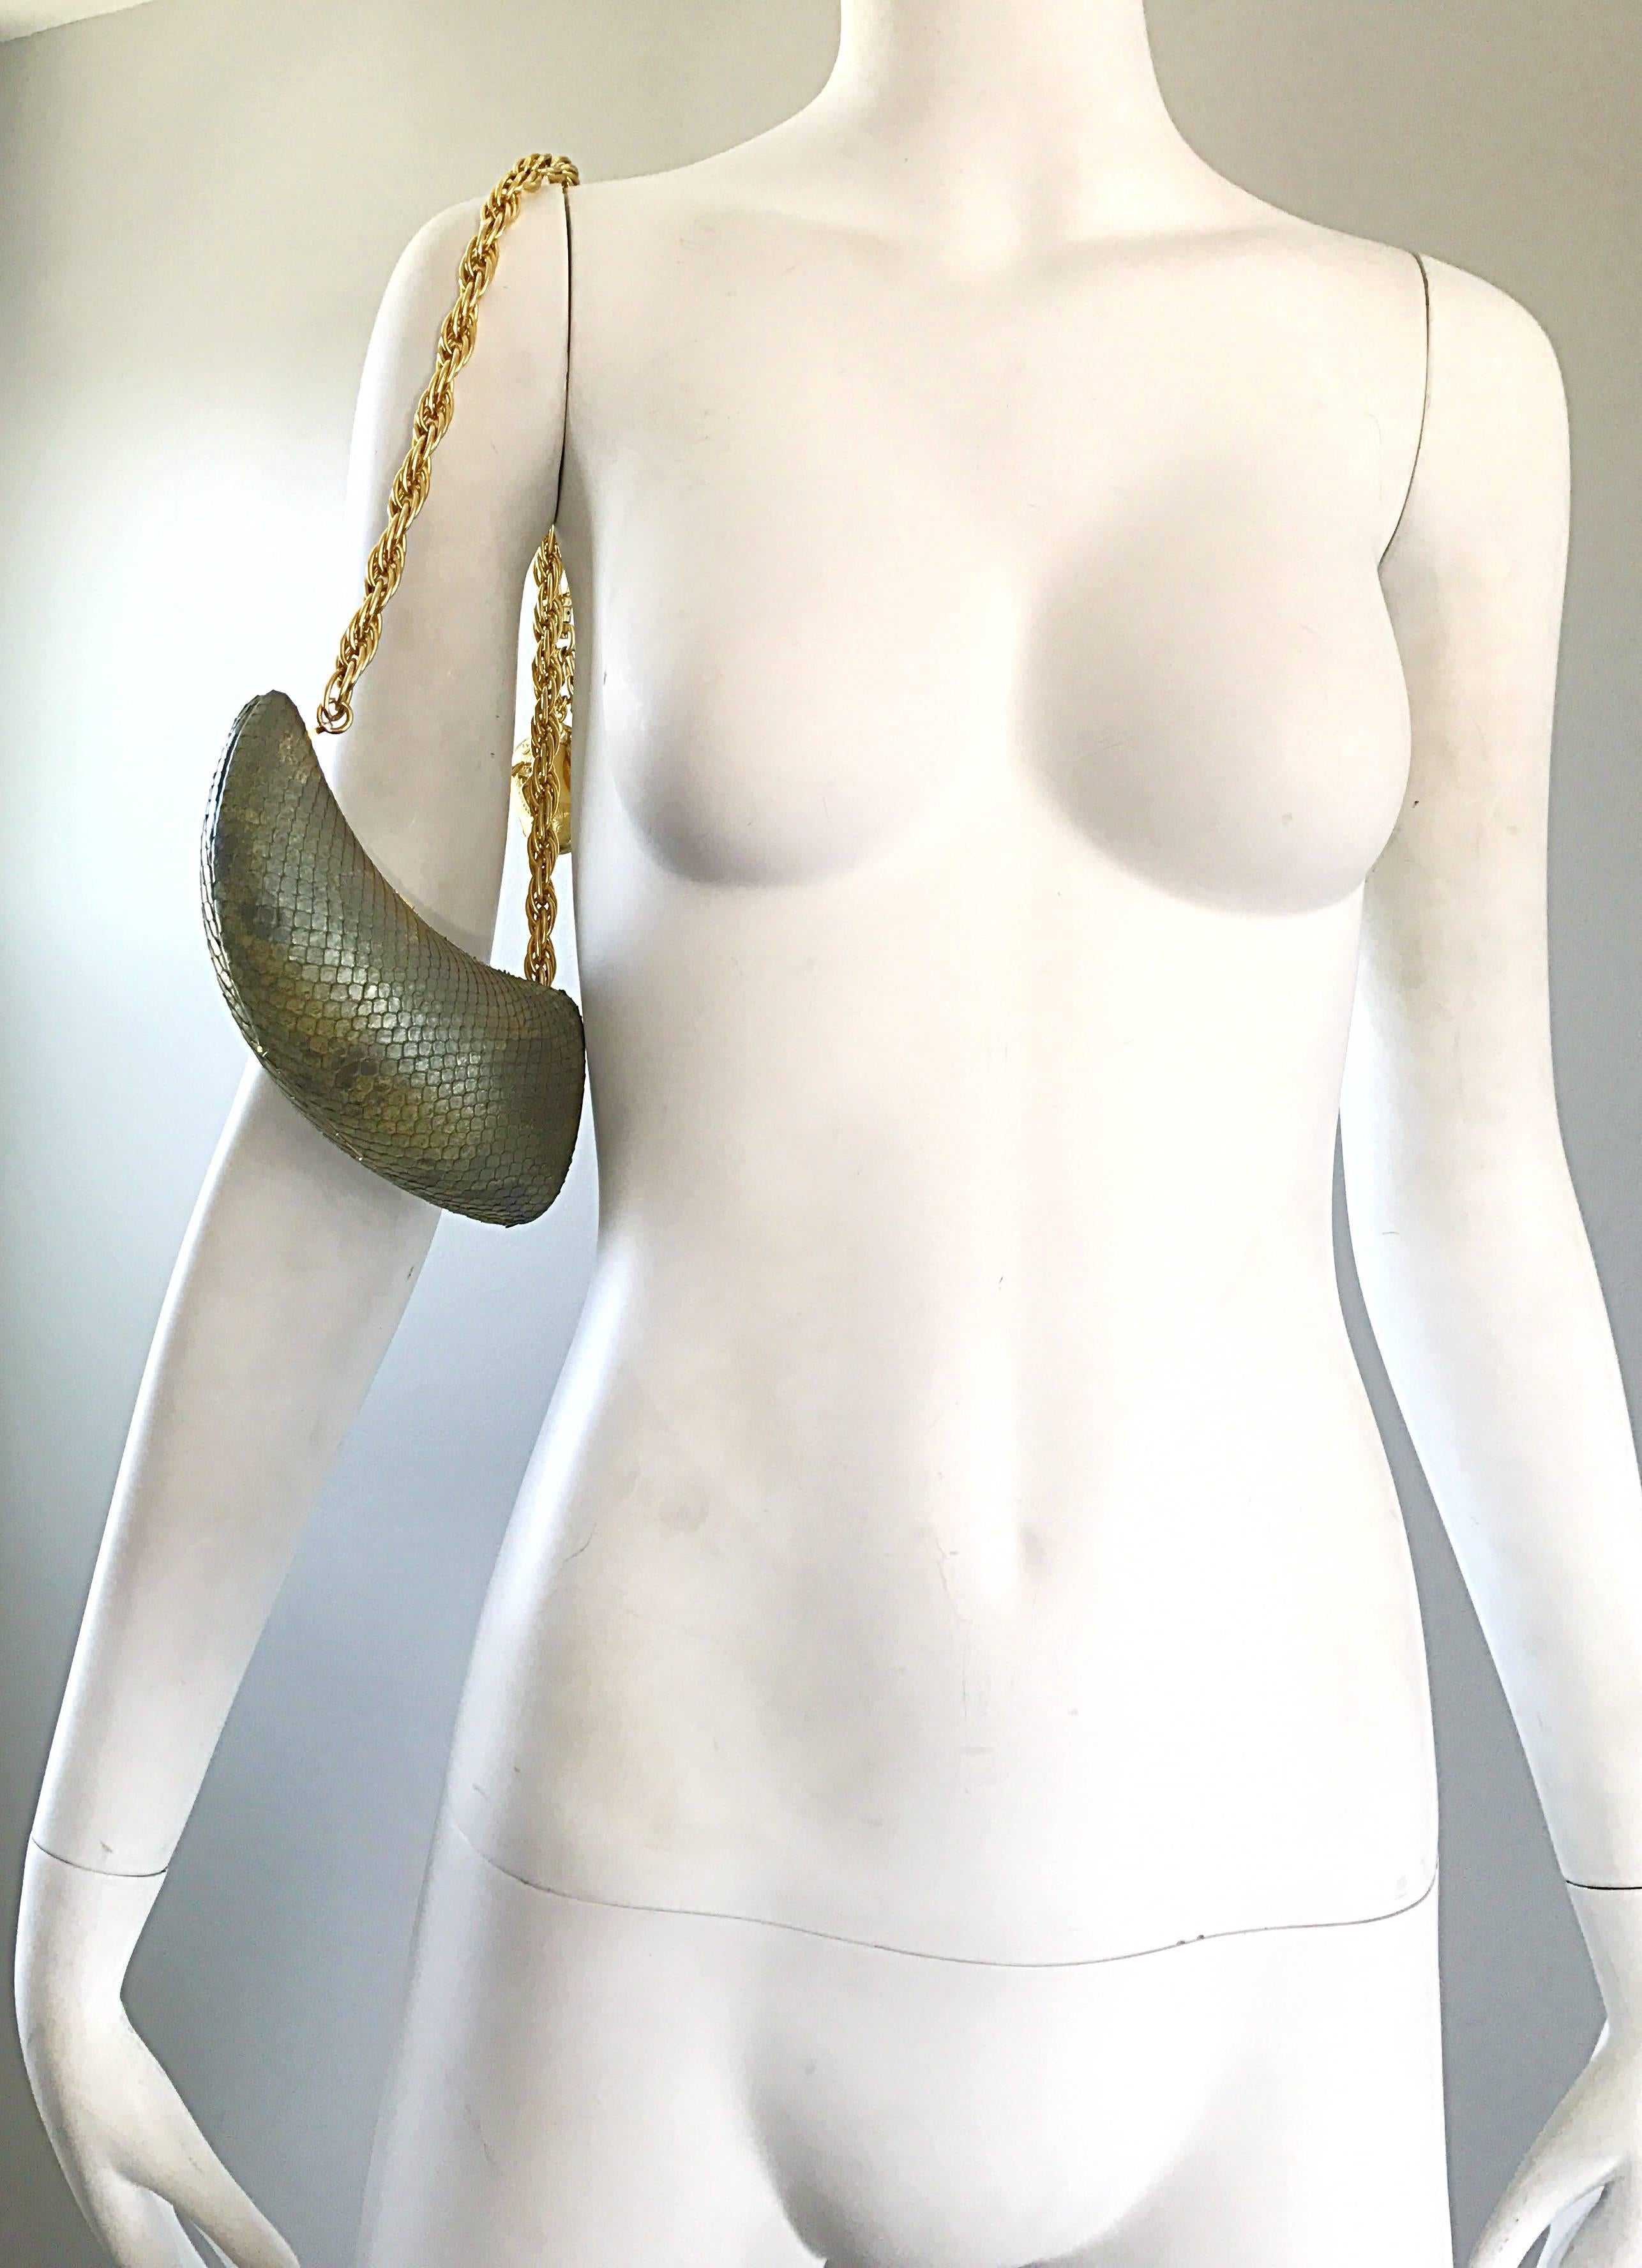 Chic avant garde snake skin horn shaped shoulder evening bag! Snakeskin with a slight iridescent sheen that resembles fish scales / mermaid. Sturdy gold chain, with just the right amount of drop to sit comfortably on the shoulder. Removable gold